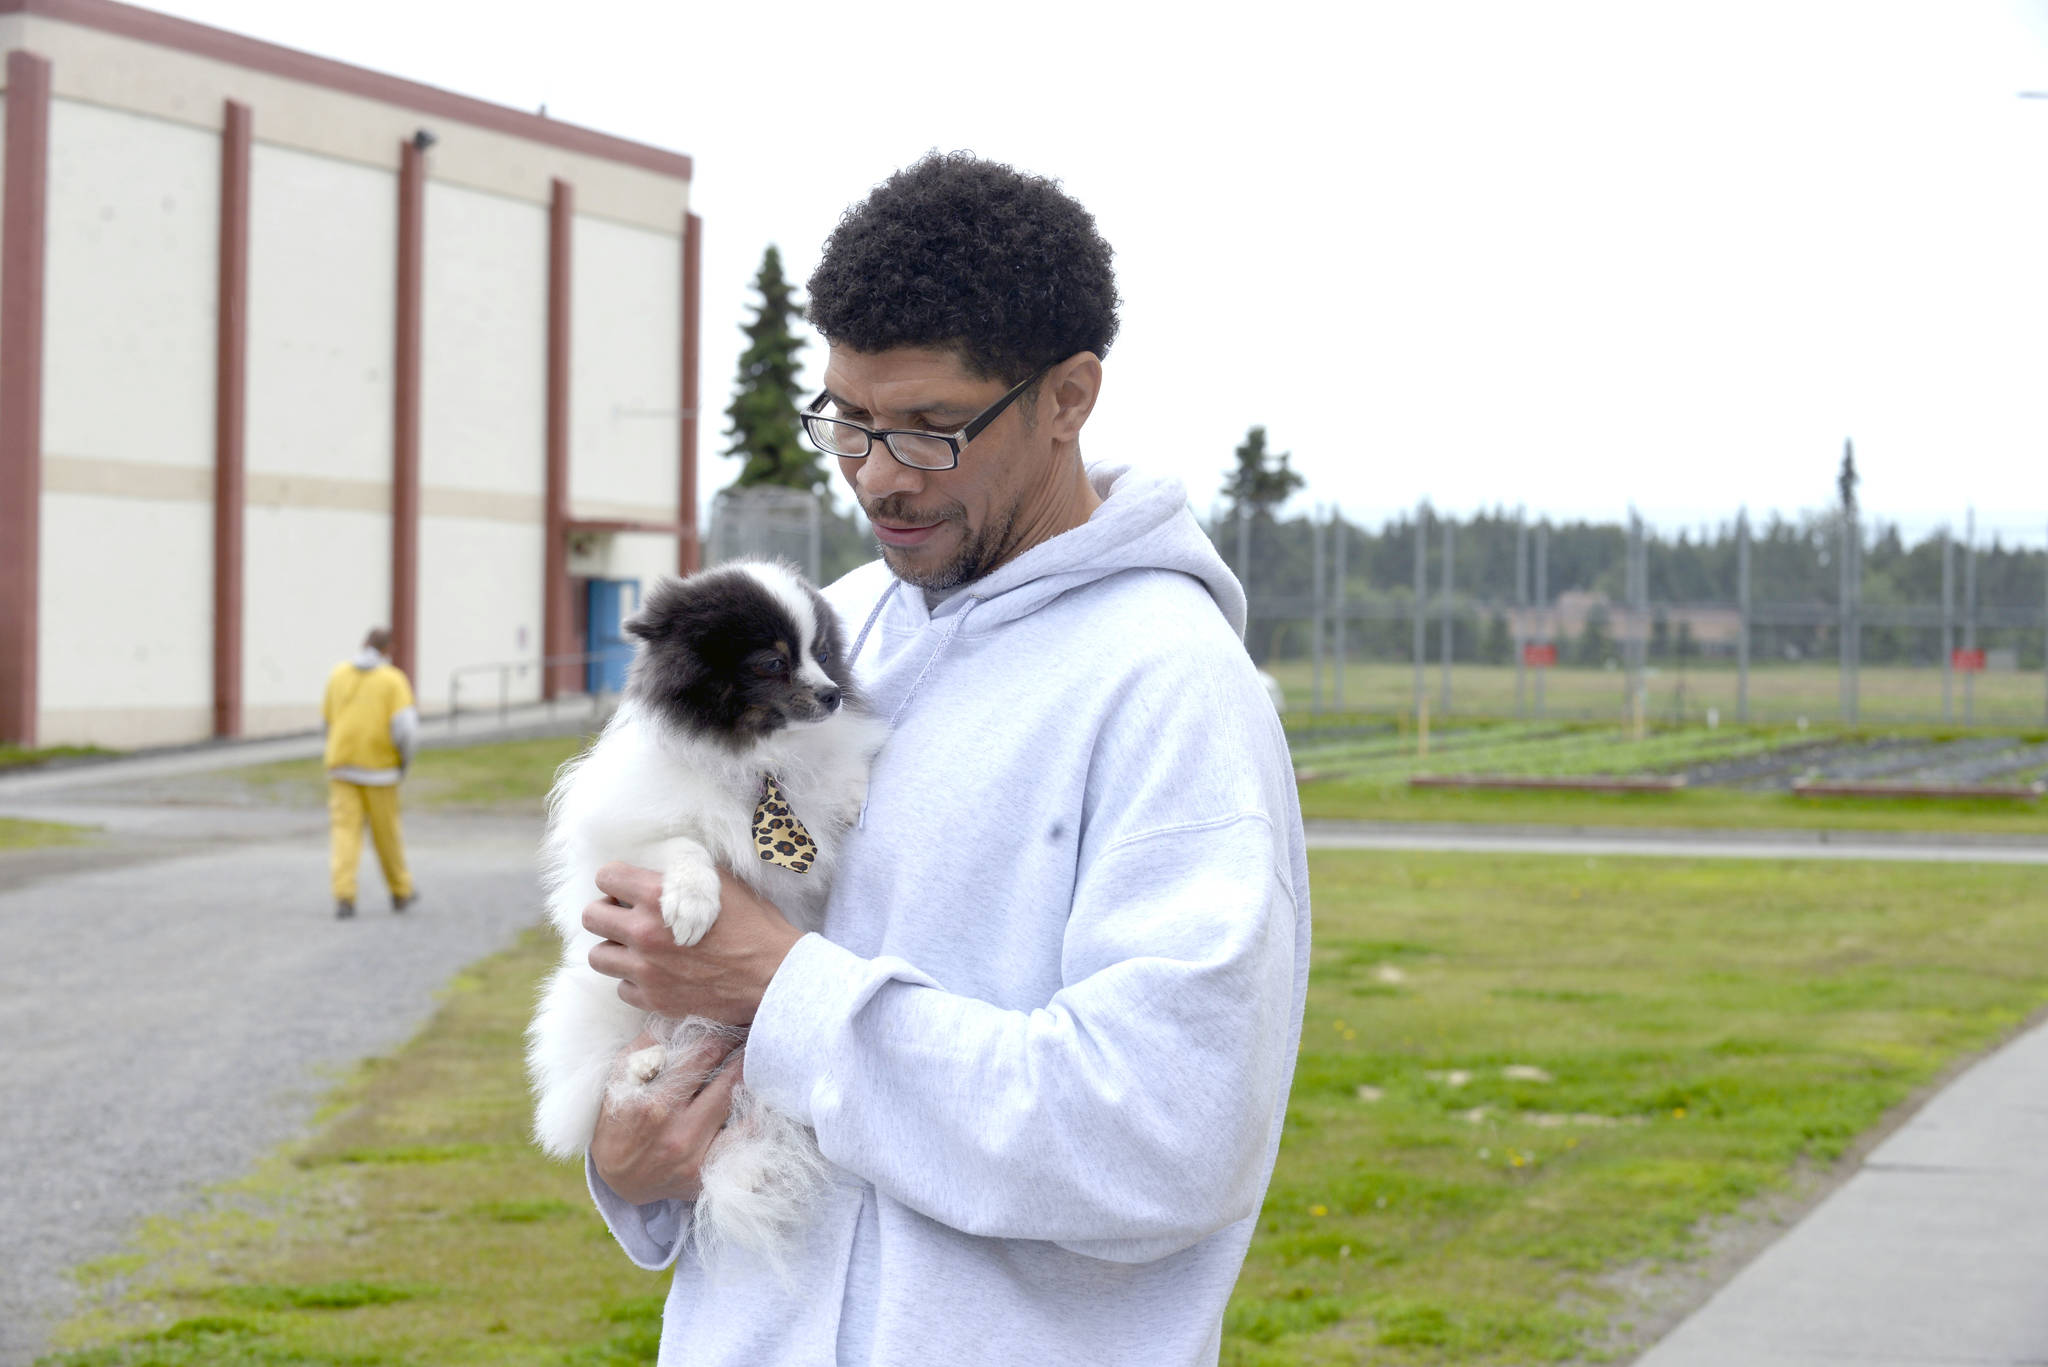 Wildwood Correctional Complex inmate Jonathan Norton holds Vicious Pretty, a Pomeranian rescue being rehabilitated through the Shelter Pet Obedience Training (SPOT) program. The program has taken in and adopted out approximately 85 dogs. (Photo by Erin Thompson/Peninsula Clarion)